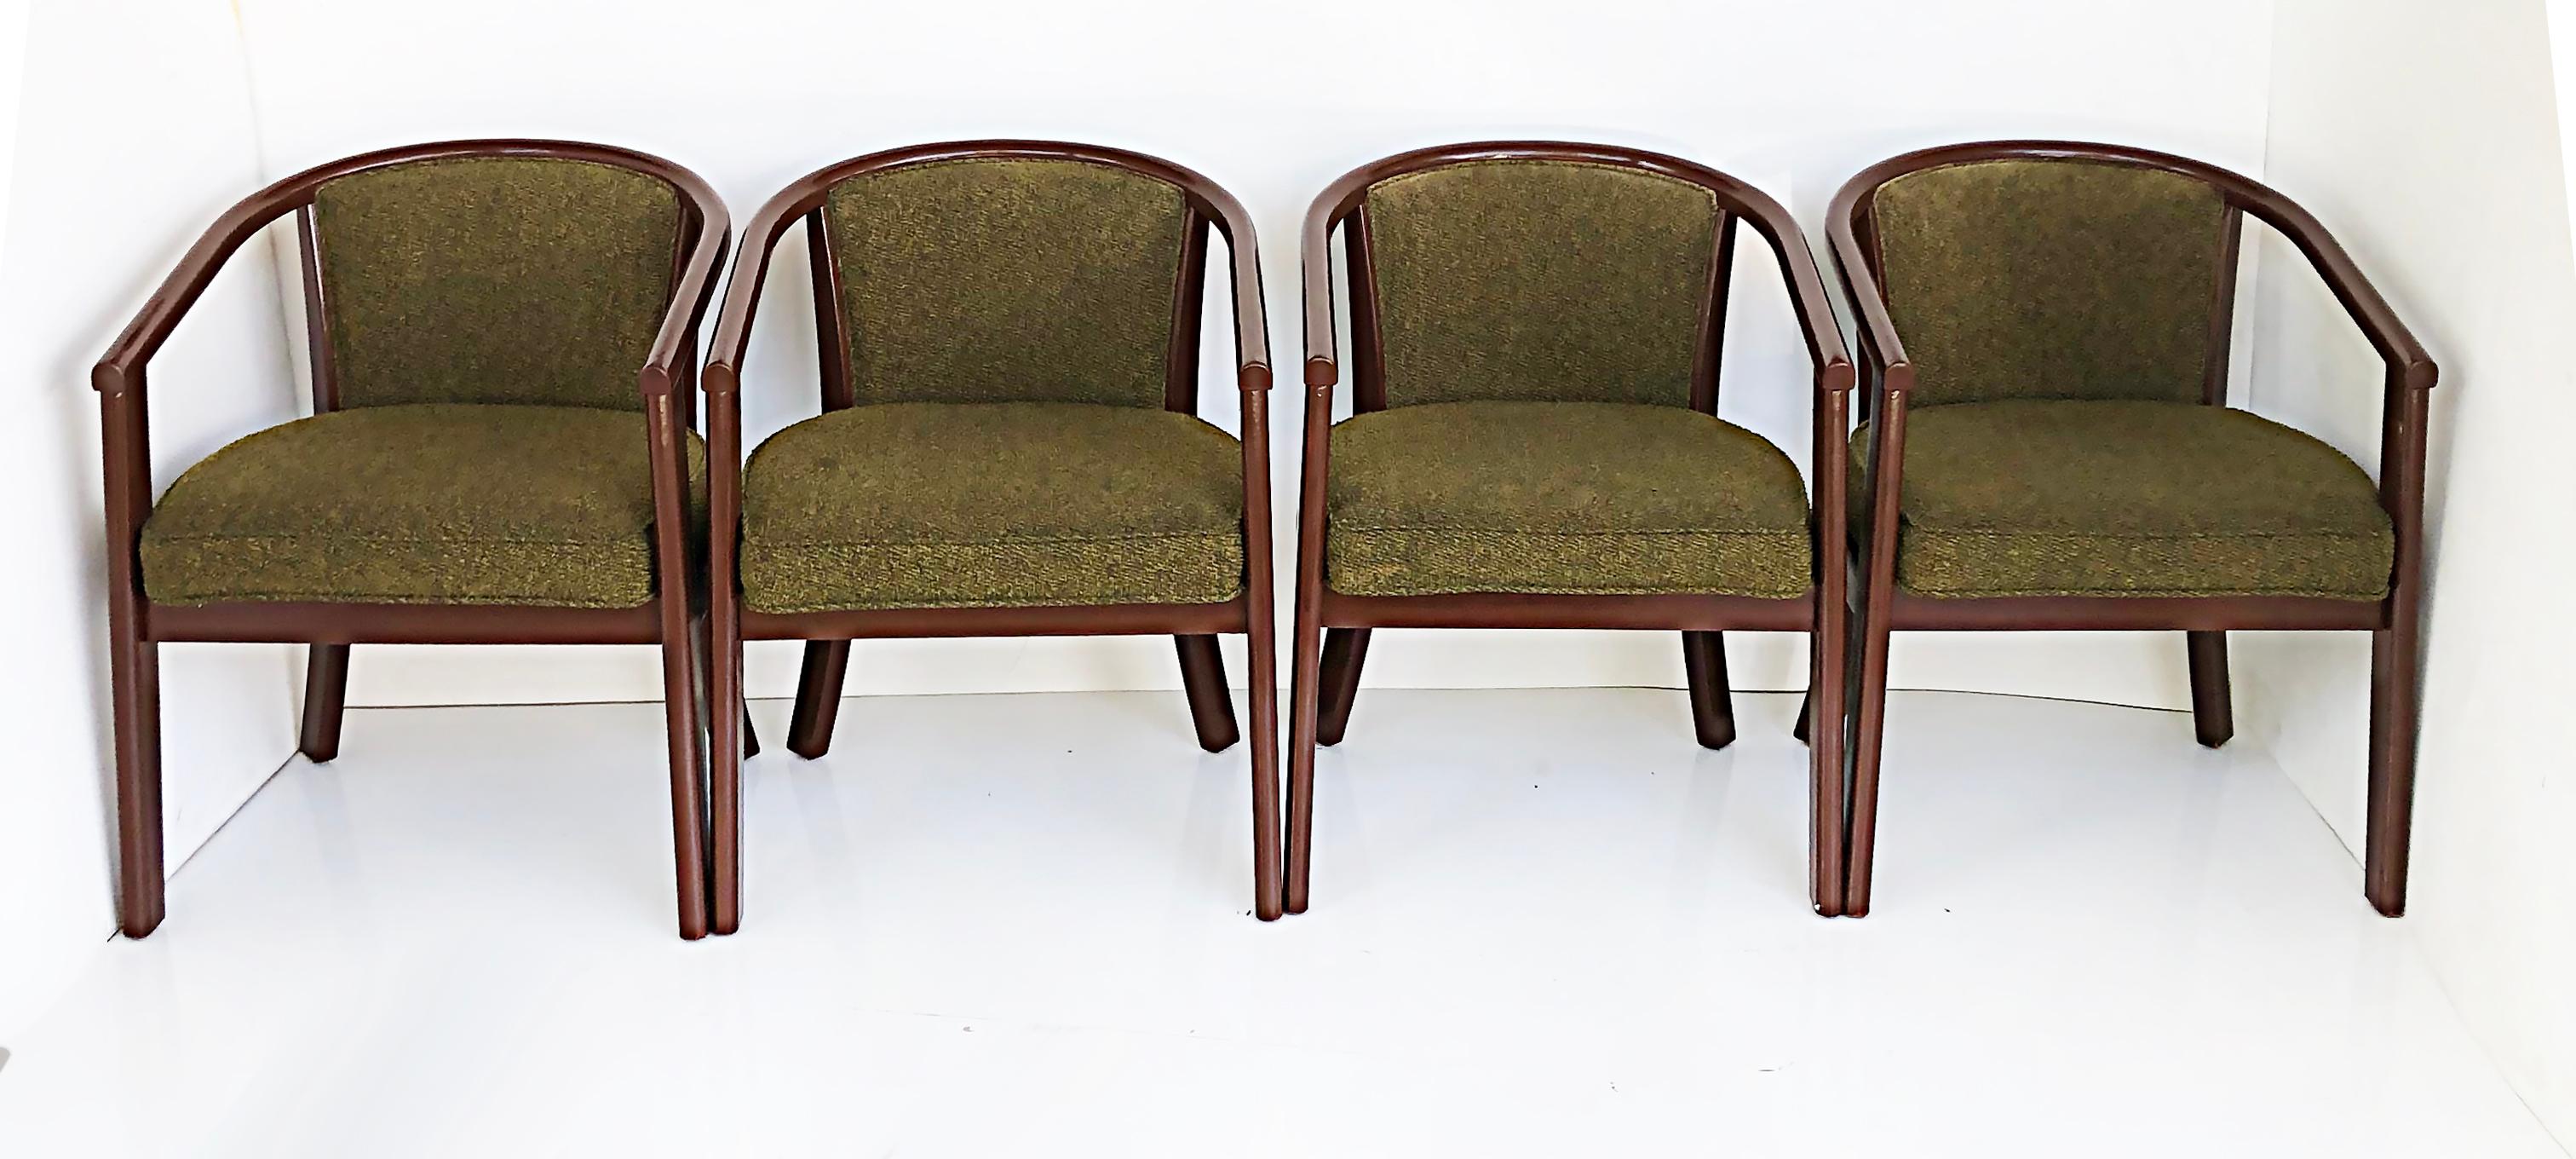 A.C. Furniture Arlington Hotel Upholstered armchairs, Set of 4

Offered for sale is a set of 4 upholstered armchairs with wood frames. These would be great around a game table or breakfast table. They are sturdy and would function nicely as chairs